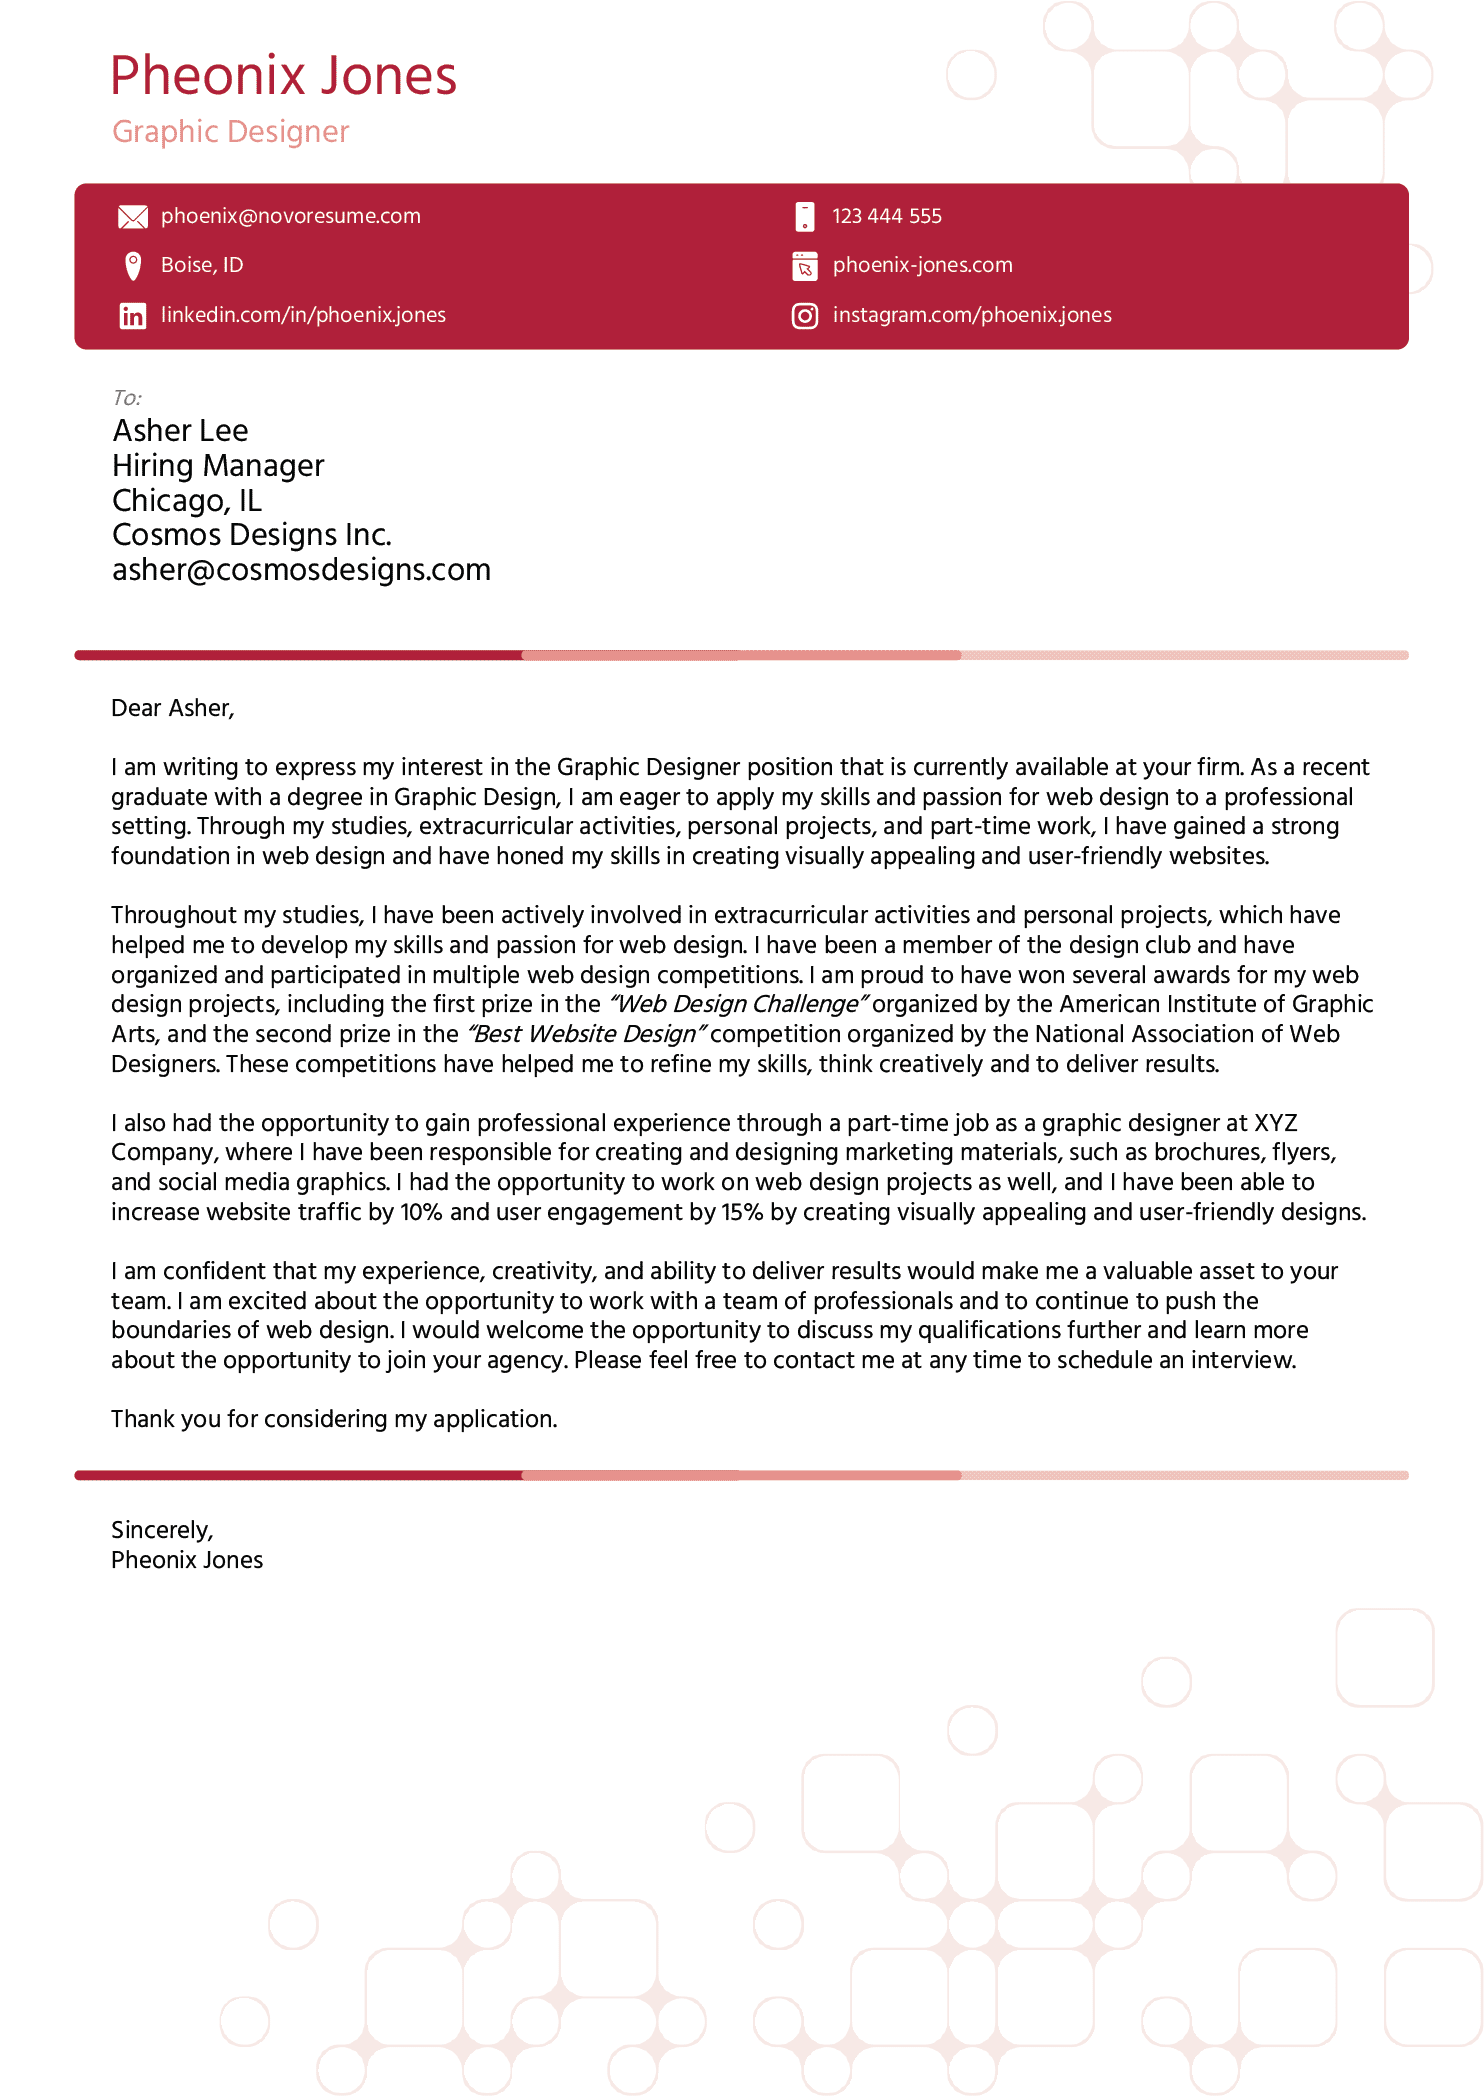 Skill-Based Cover Letter Template